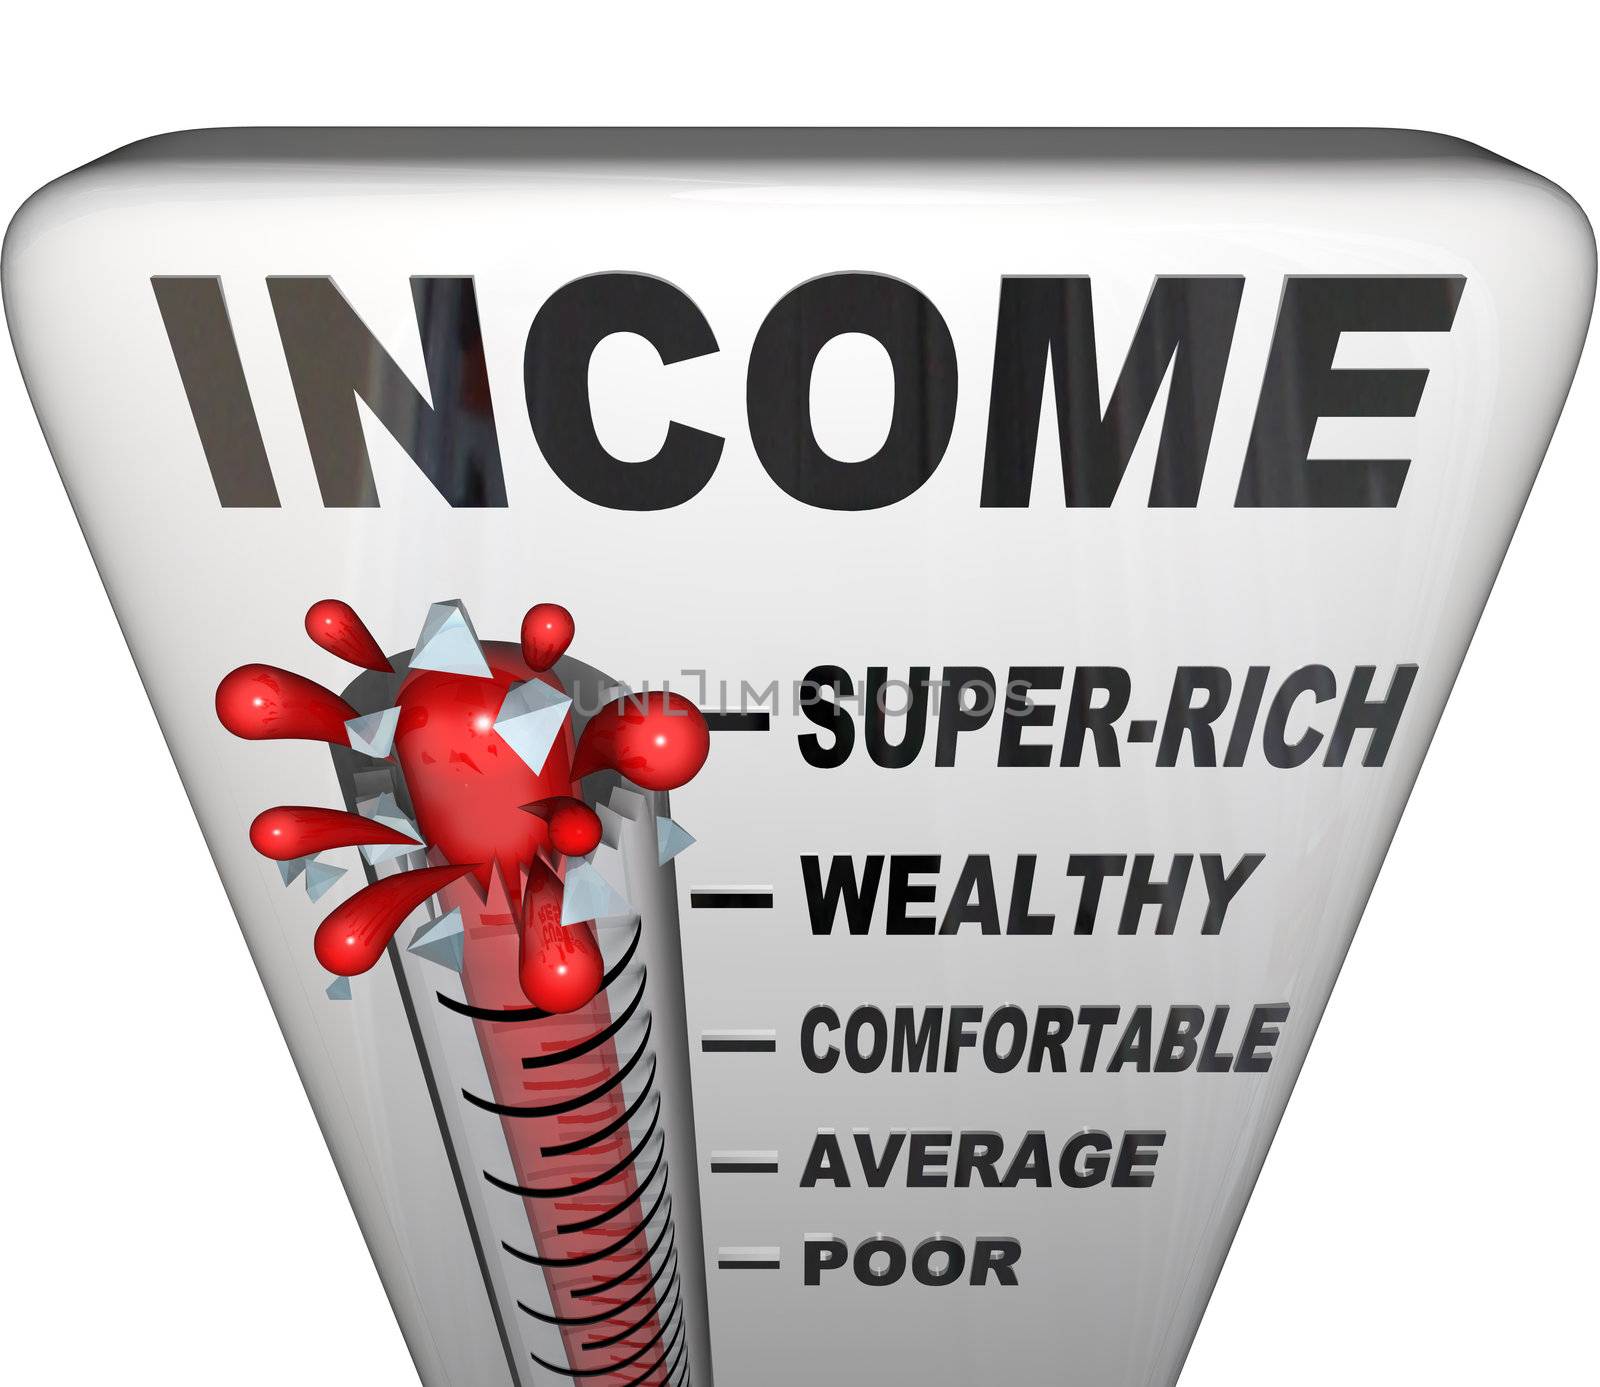 A thermometer measuring your income as you earn more money after a promotion or raise, with mercury level rising past poor and average to comfortable, wealthy and super rich